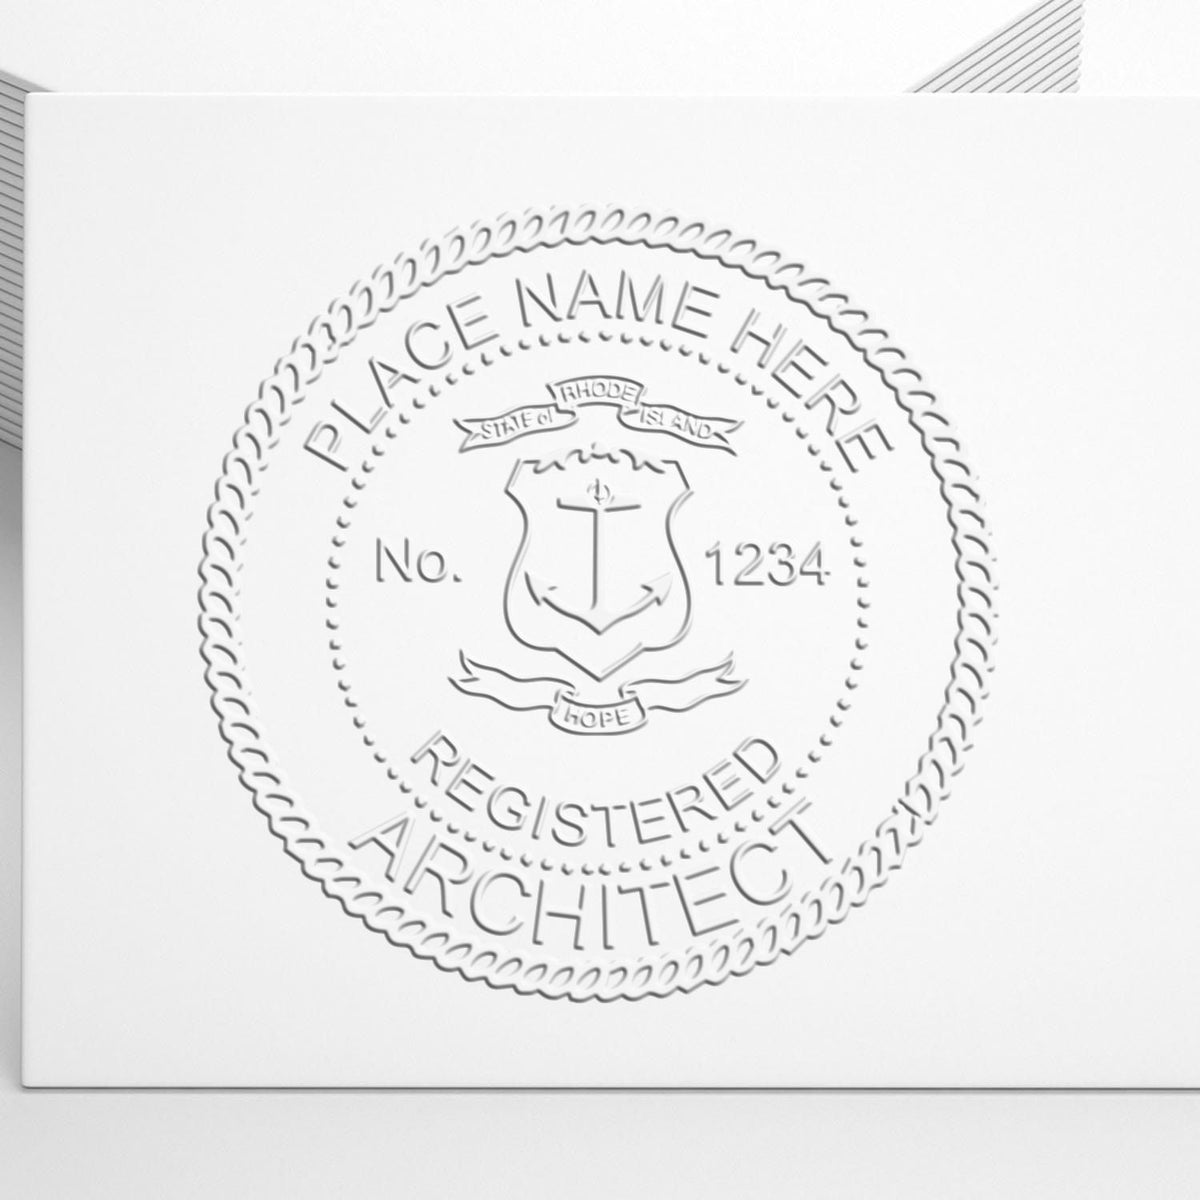 An in use photo of the Hybrid Rhode Island Architect Seal showing a sample imprint on a cardstock